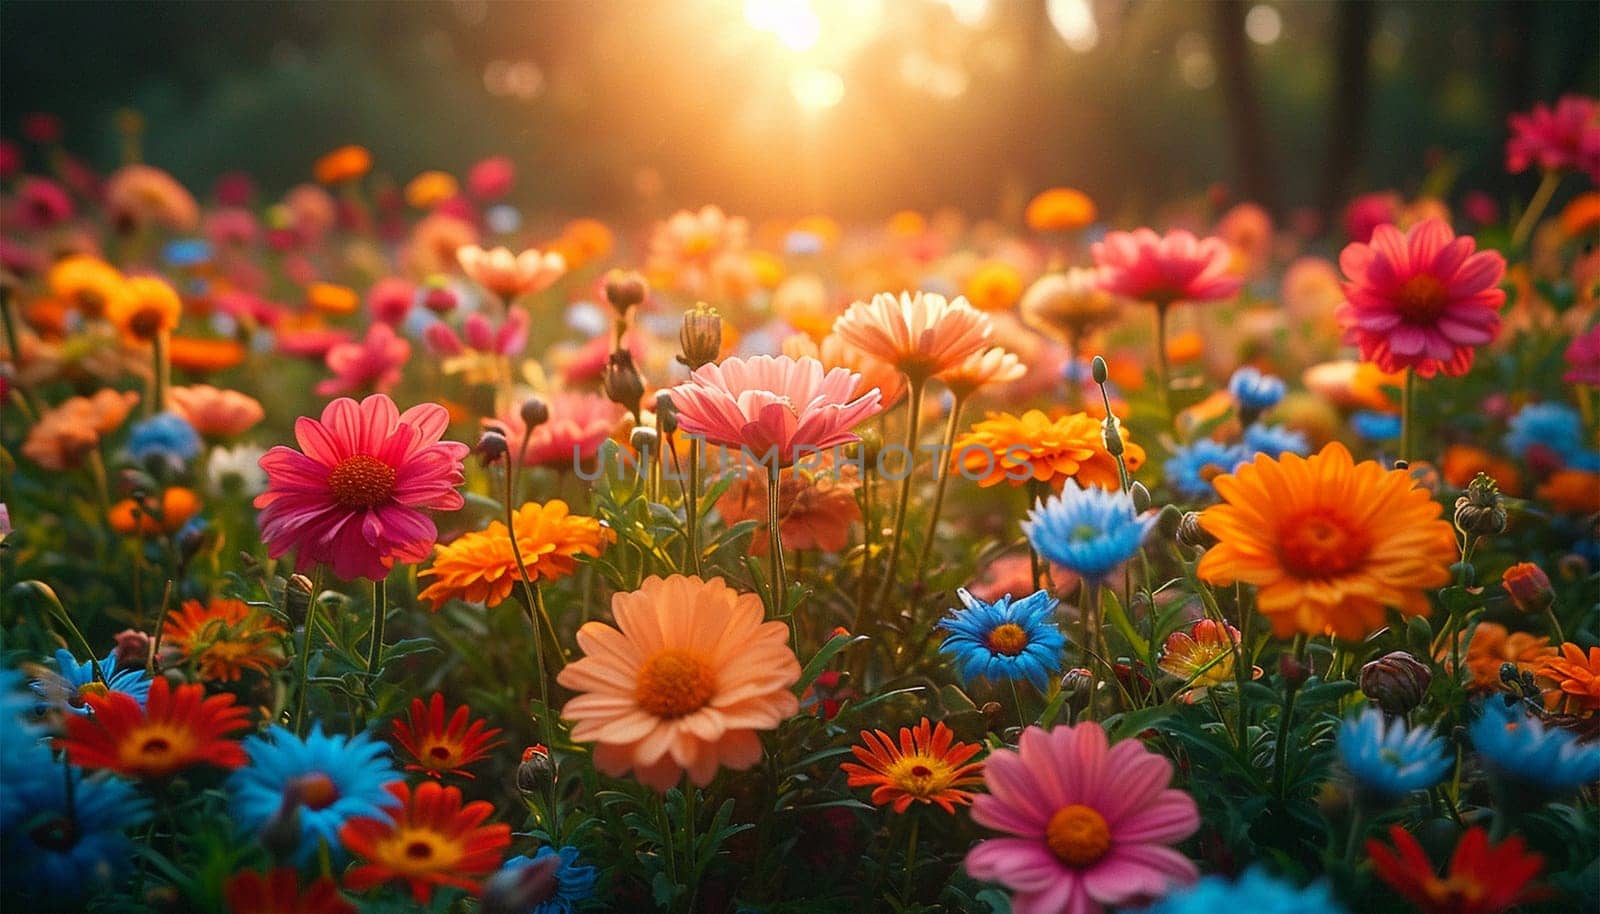 Colorful spring flowers in the sun. Various colored. Summer alpine meadow with colorful wildflowers. Camera moves among grass and colorful flowers, backlight, sunset. Summer alpine green flora background beauty cheerful